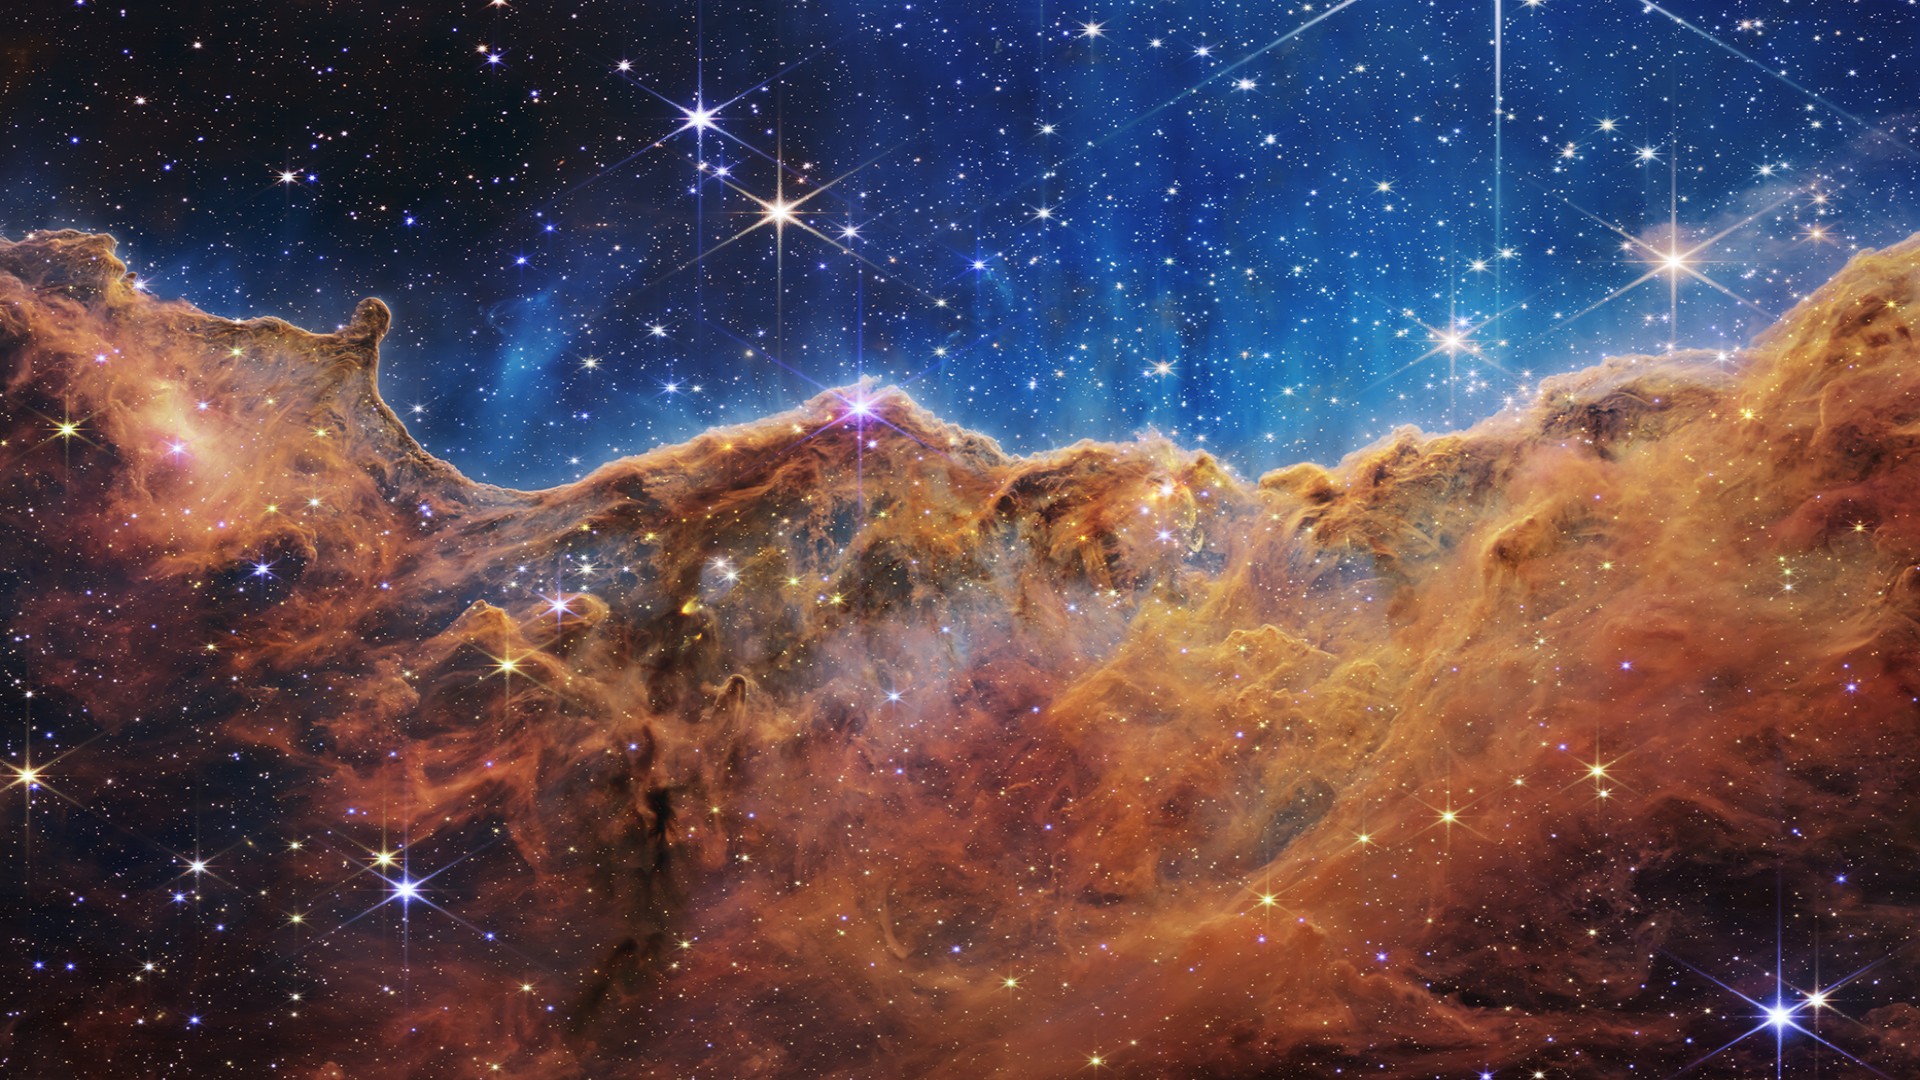 A composite image of the Cosmic Cliffs in the Carina Nebula, created with the Webb telescope's NIRCam and MIRI instruments.